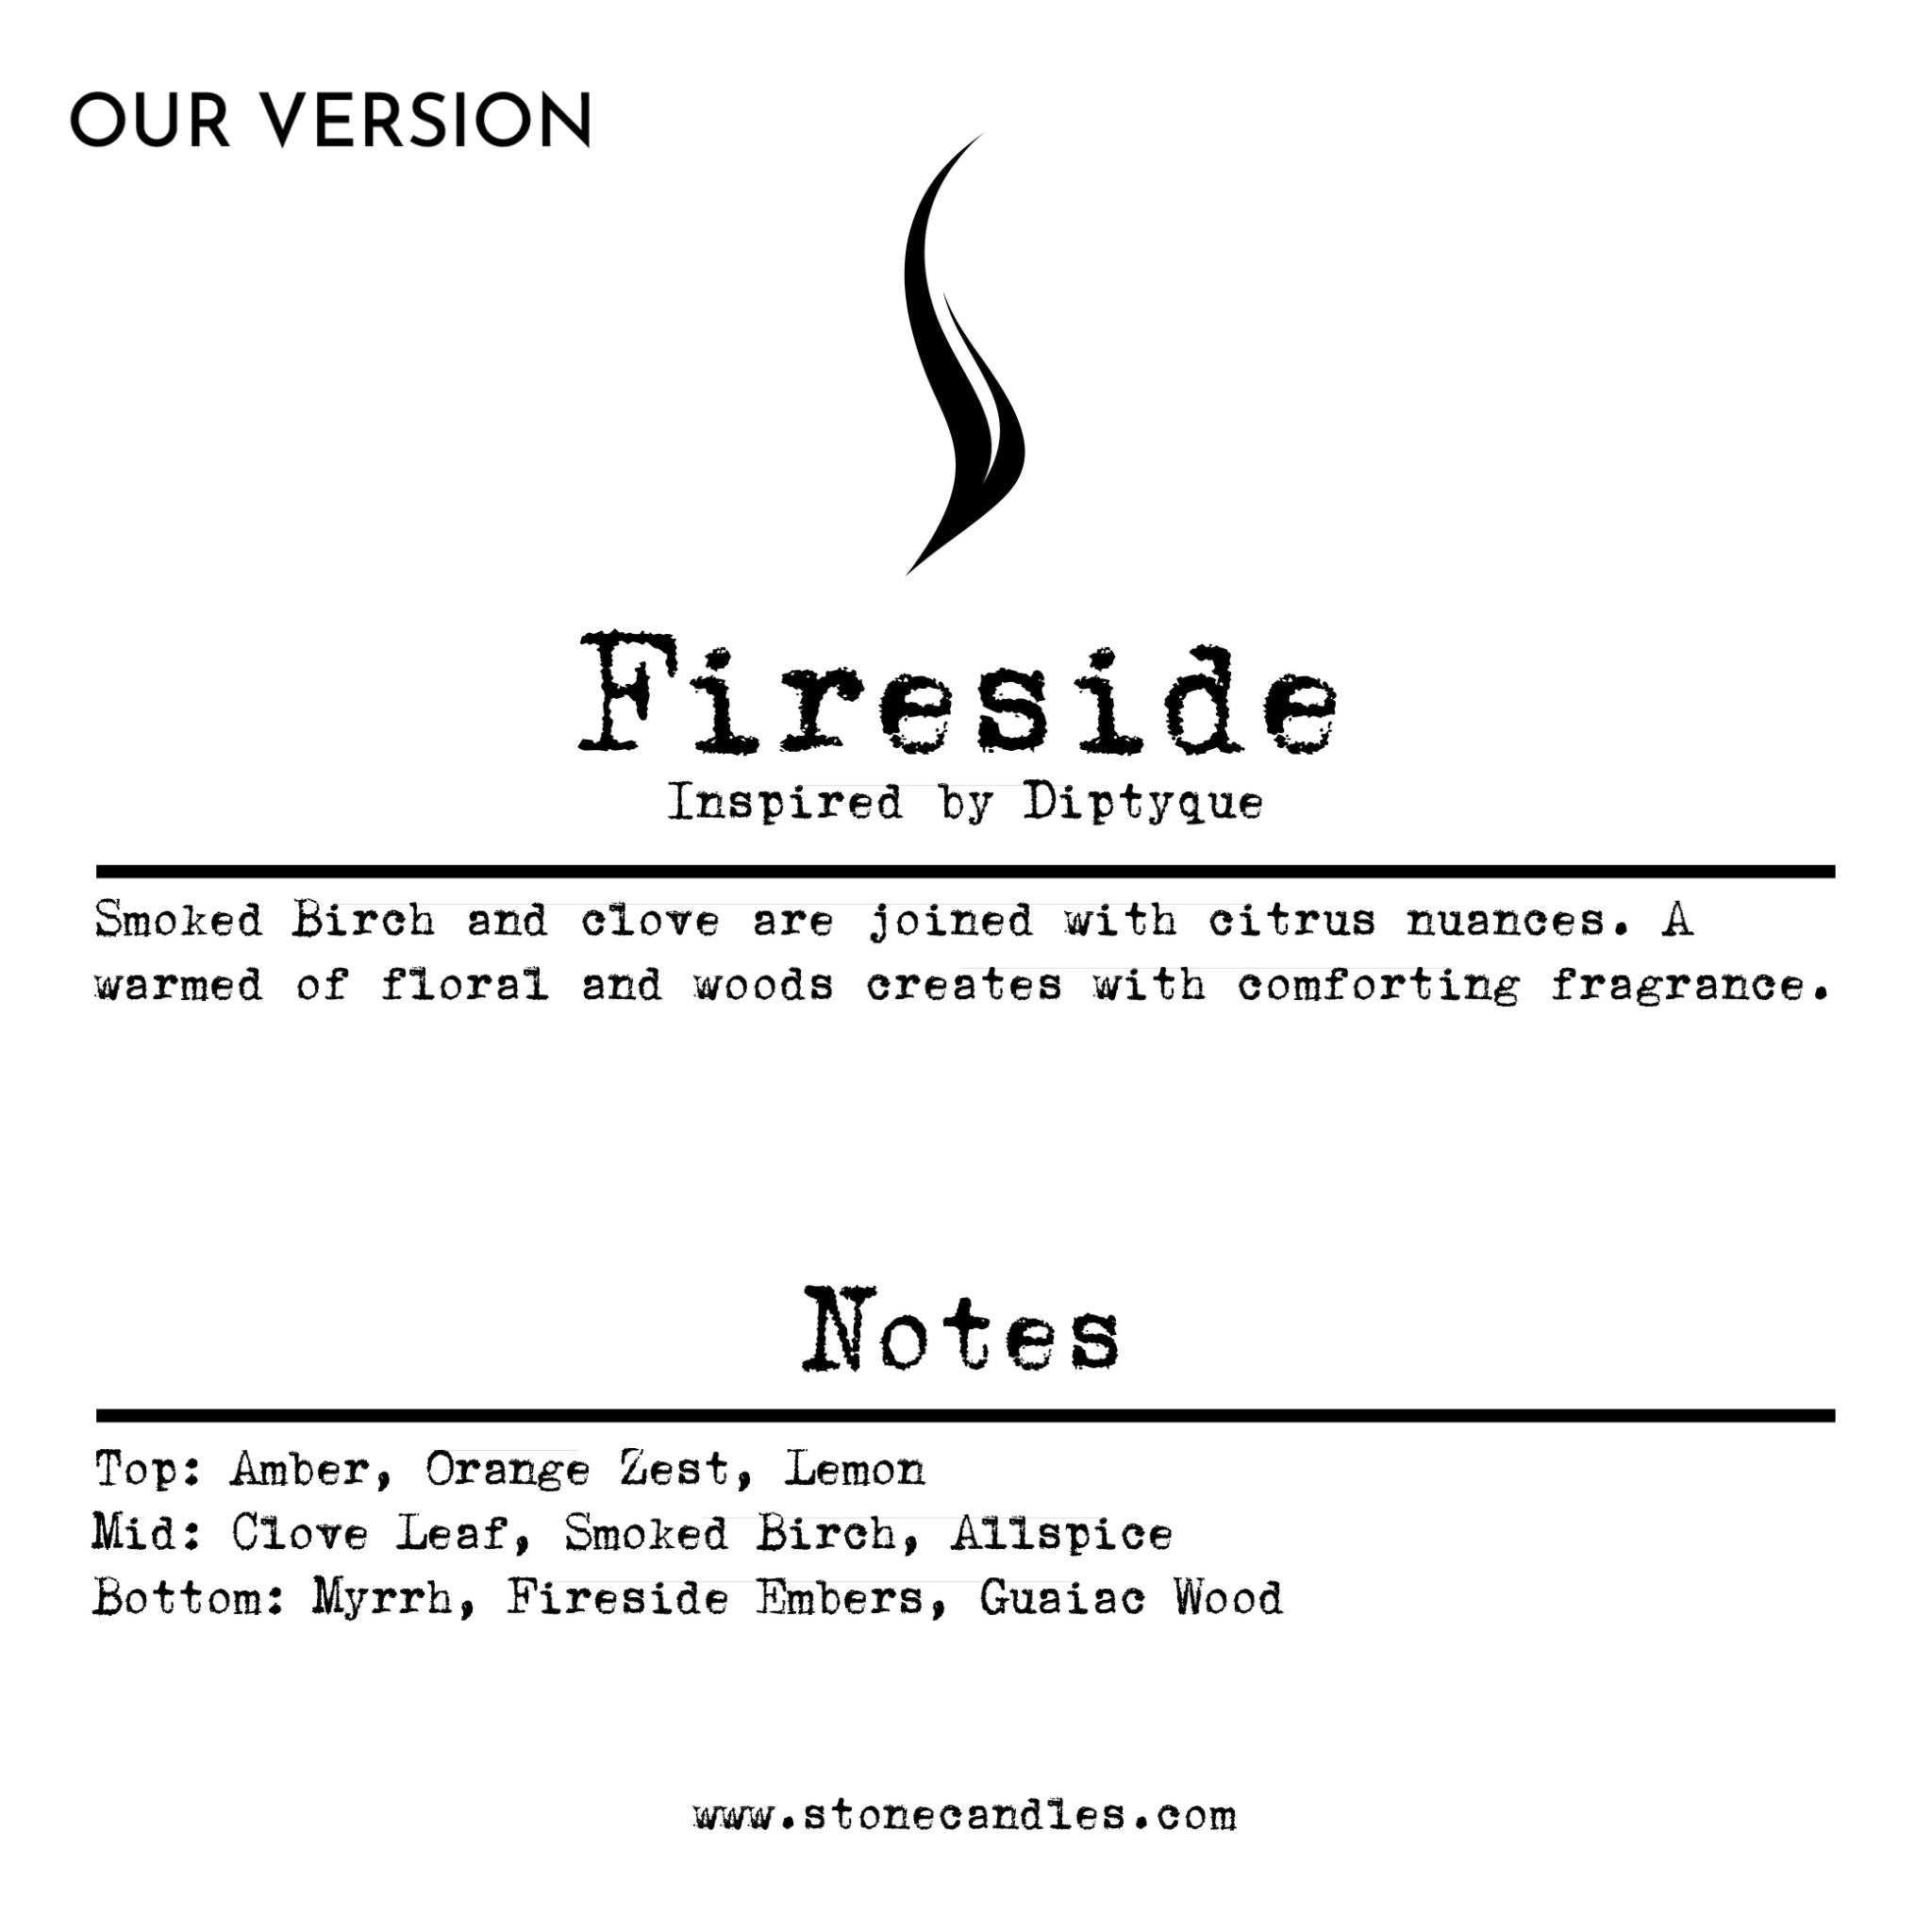 Fireside (our version) Sample Scent Strip